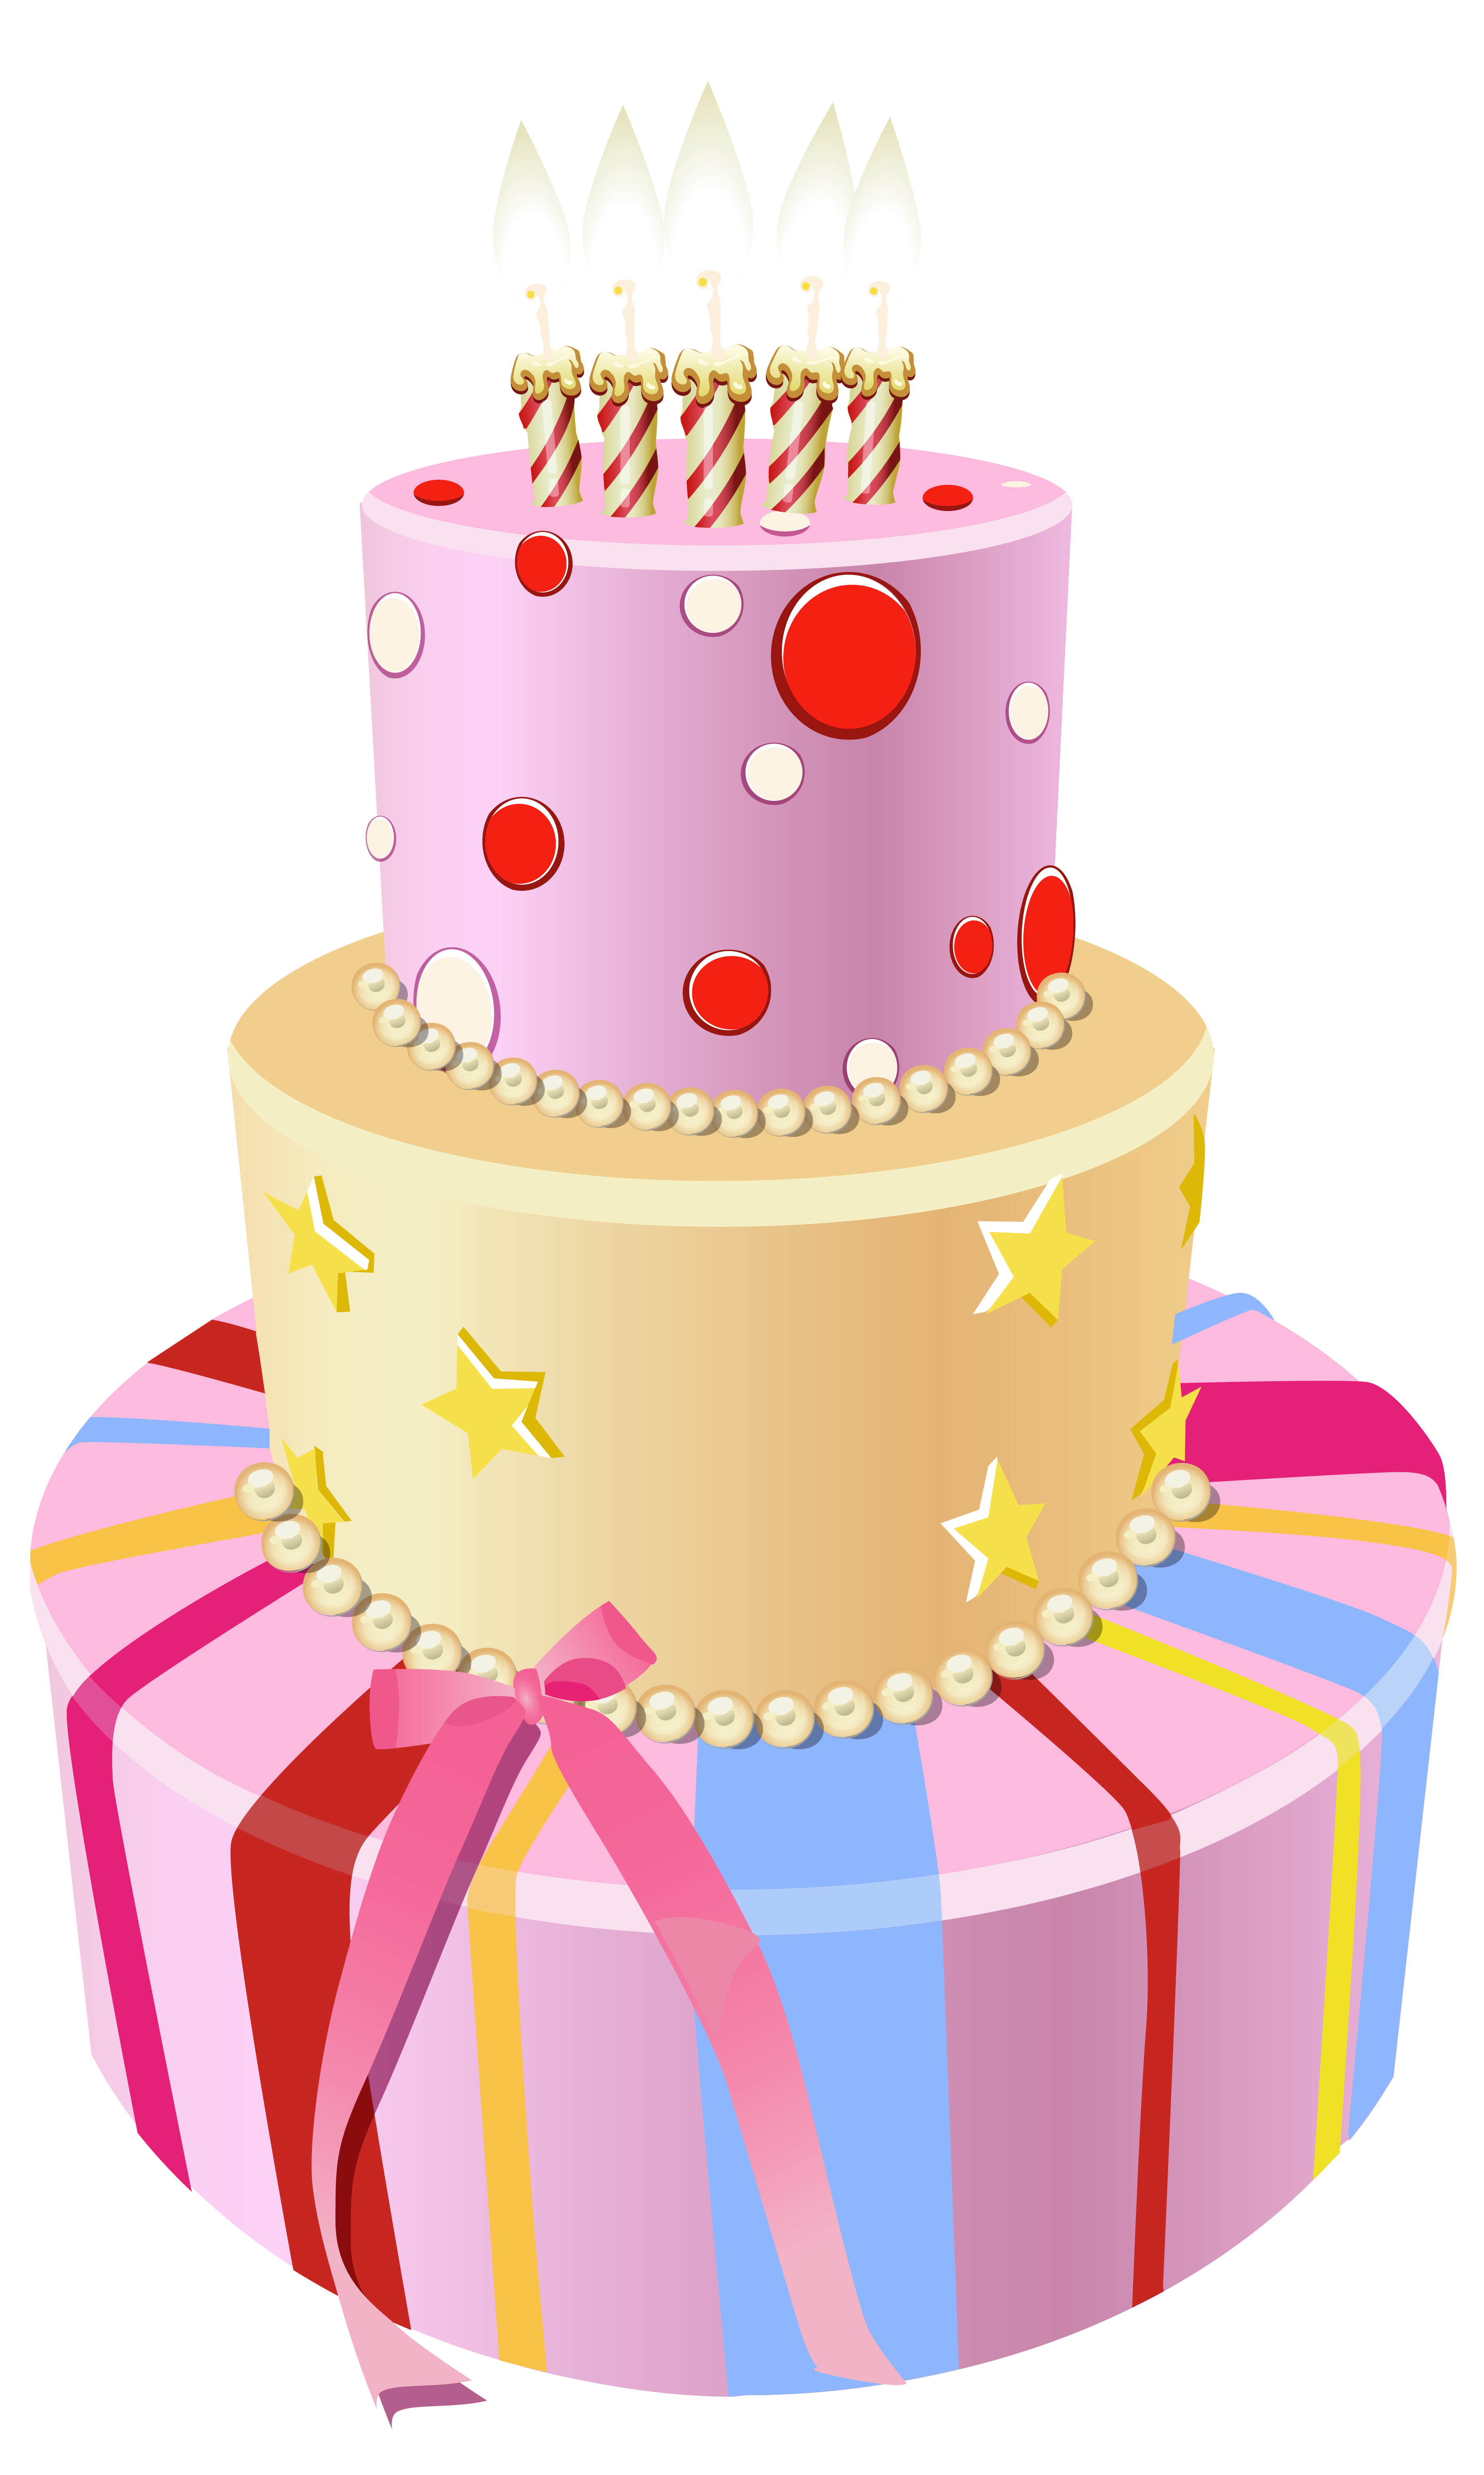 Birthday cake Clip art - Pink Birthday Cake PNG Clipart Image png